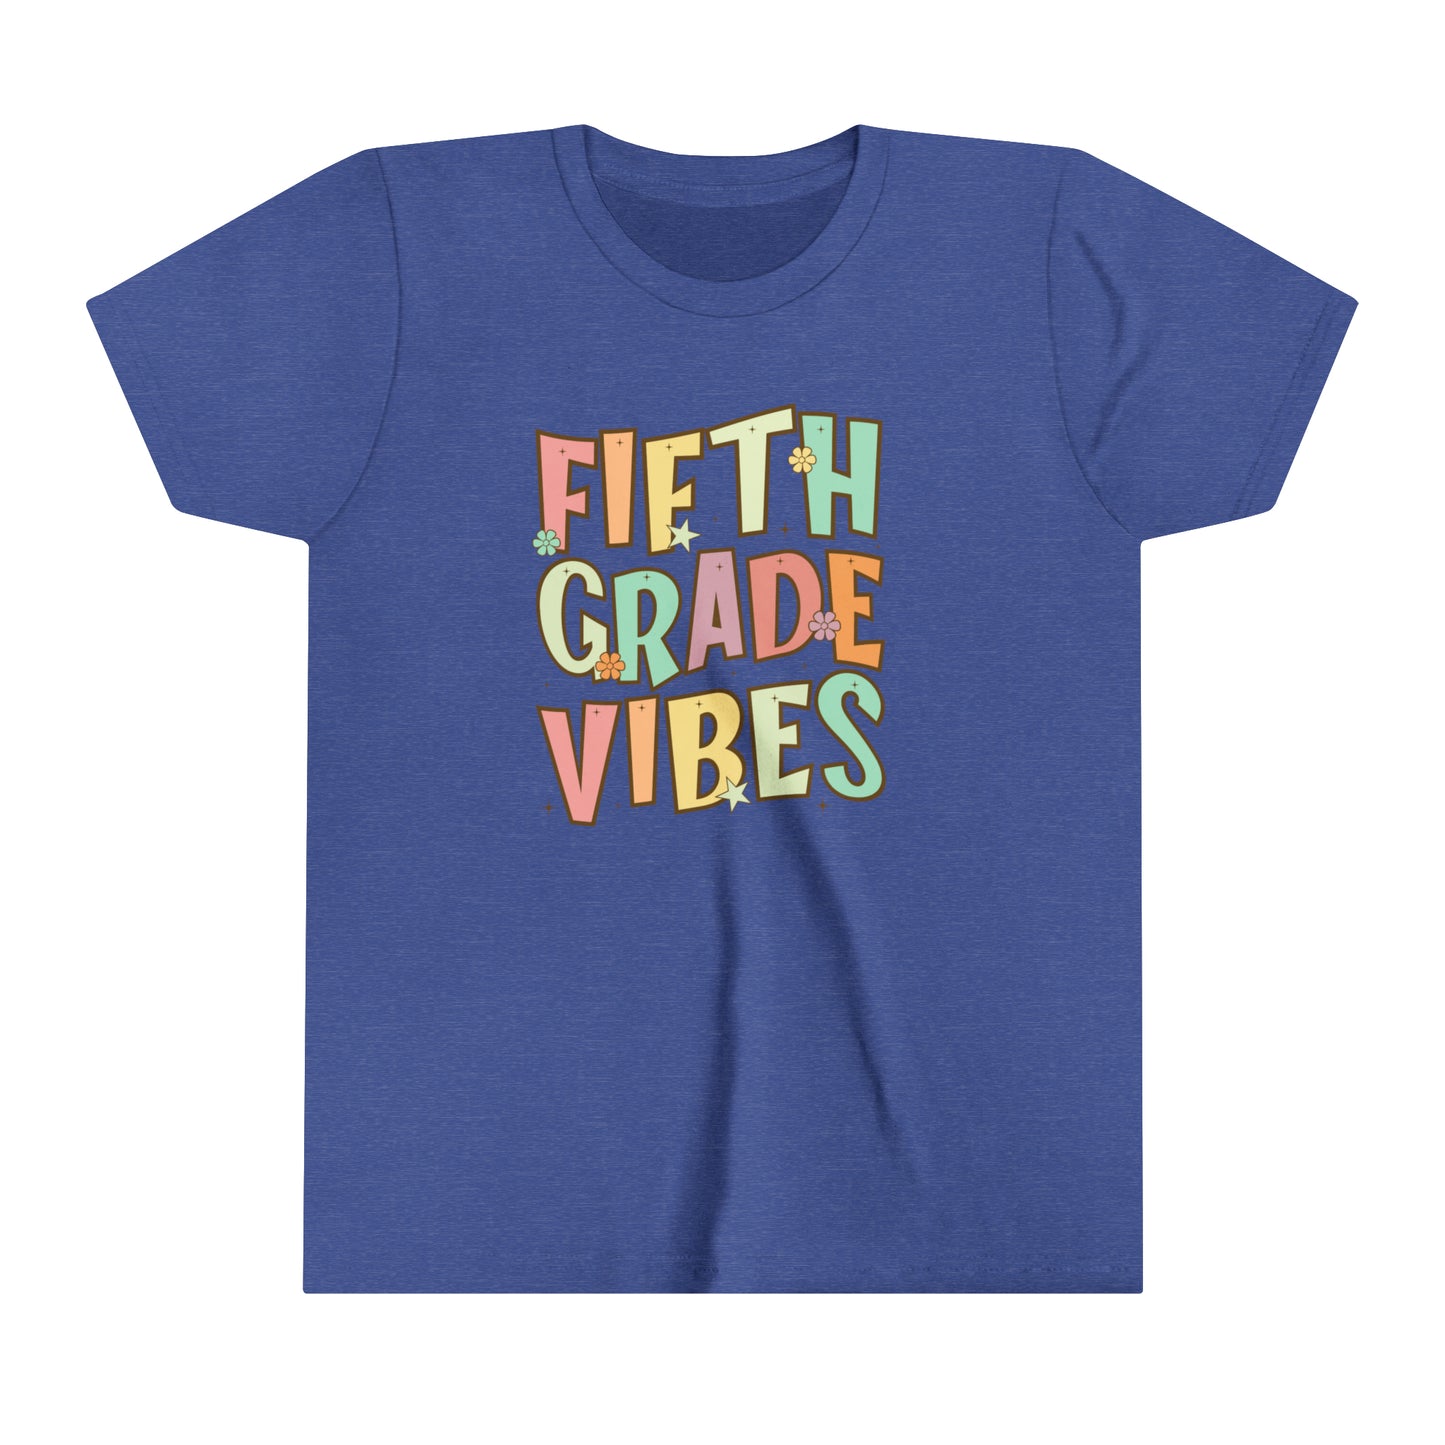 Fifth Grade Vibes Girl's Youth Short Sleeve Tee